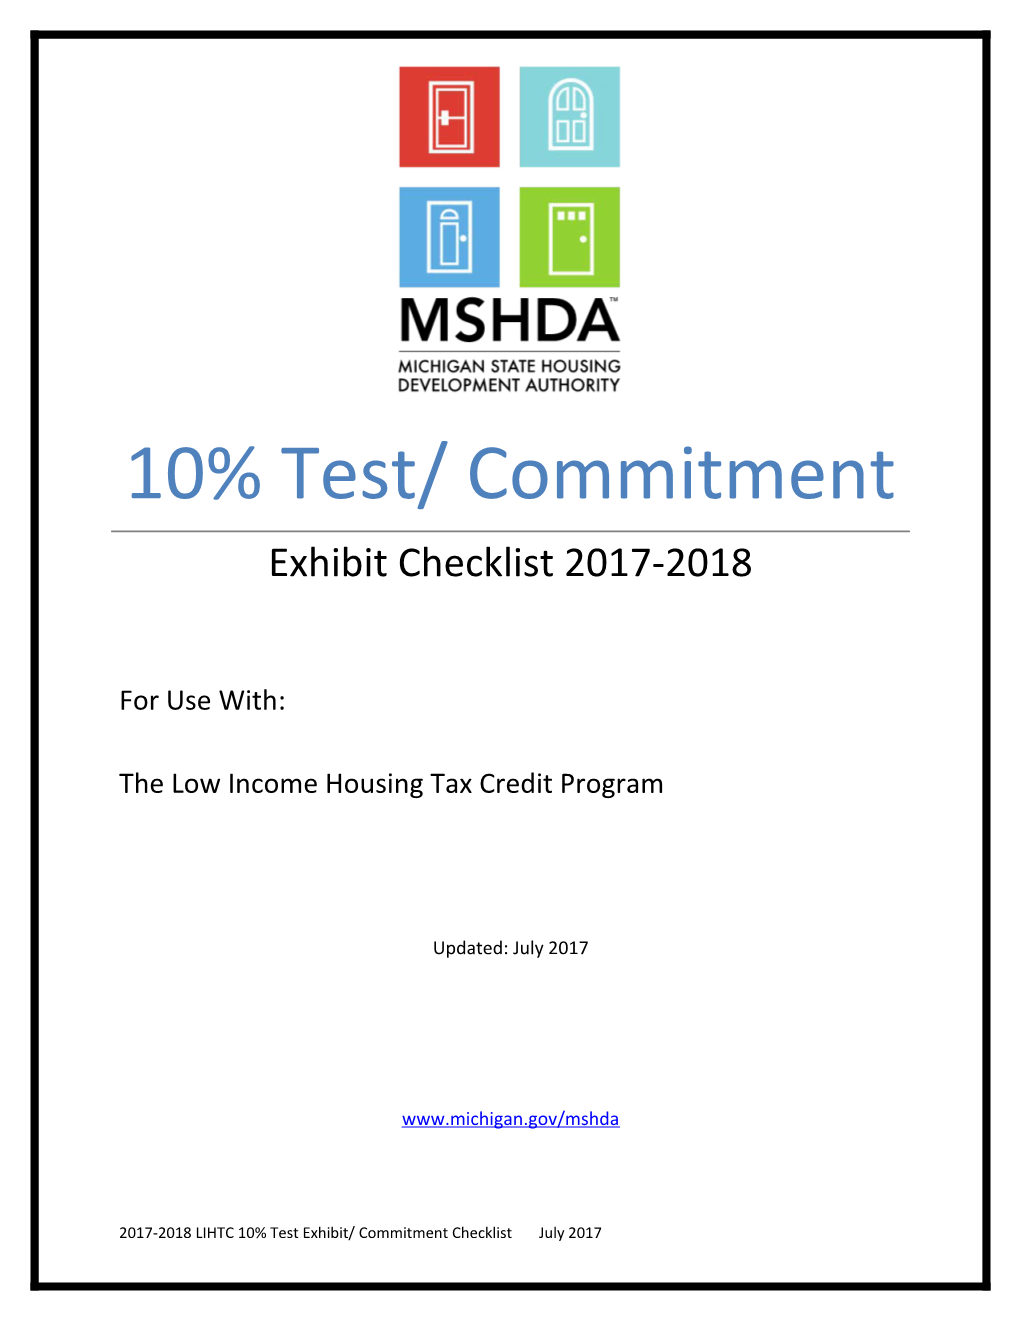 The Low Income Housing Tax Credit Program